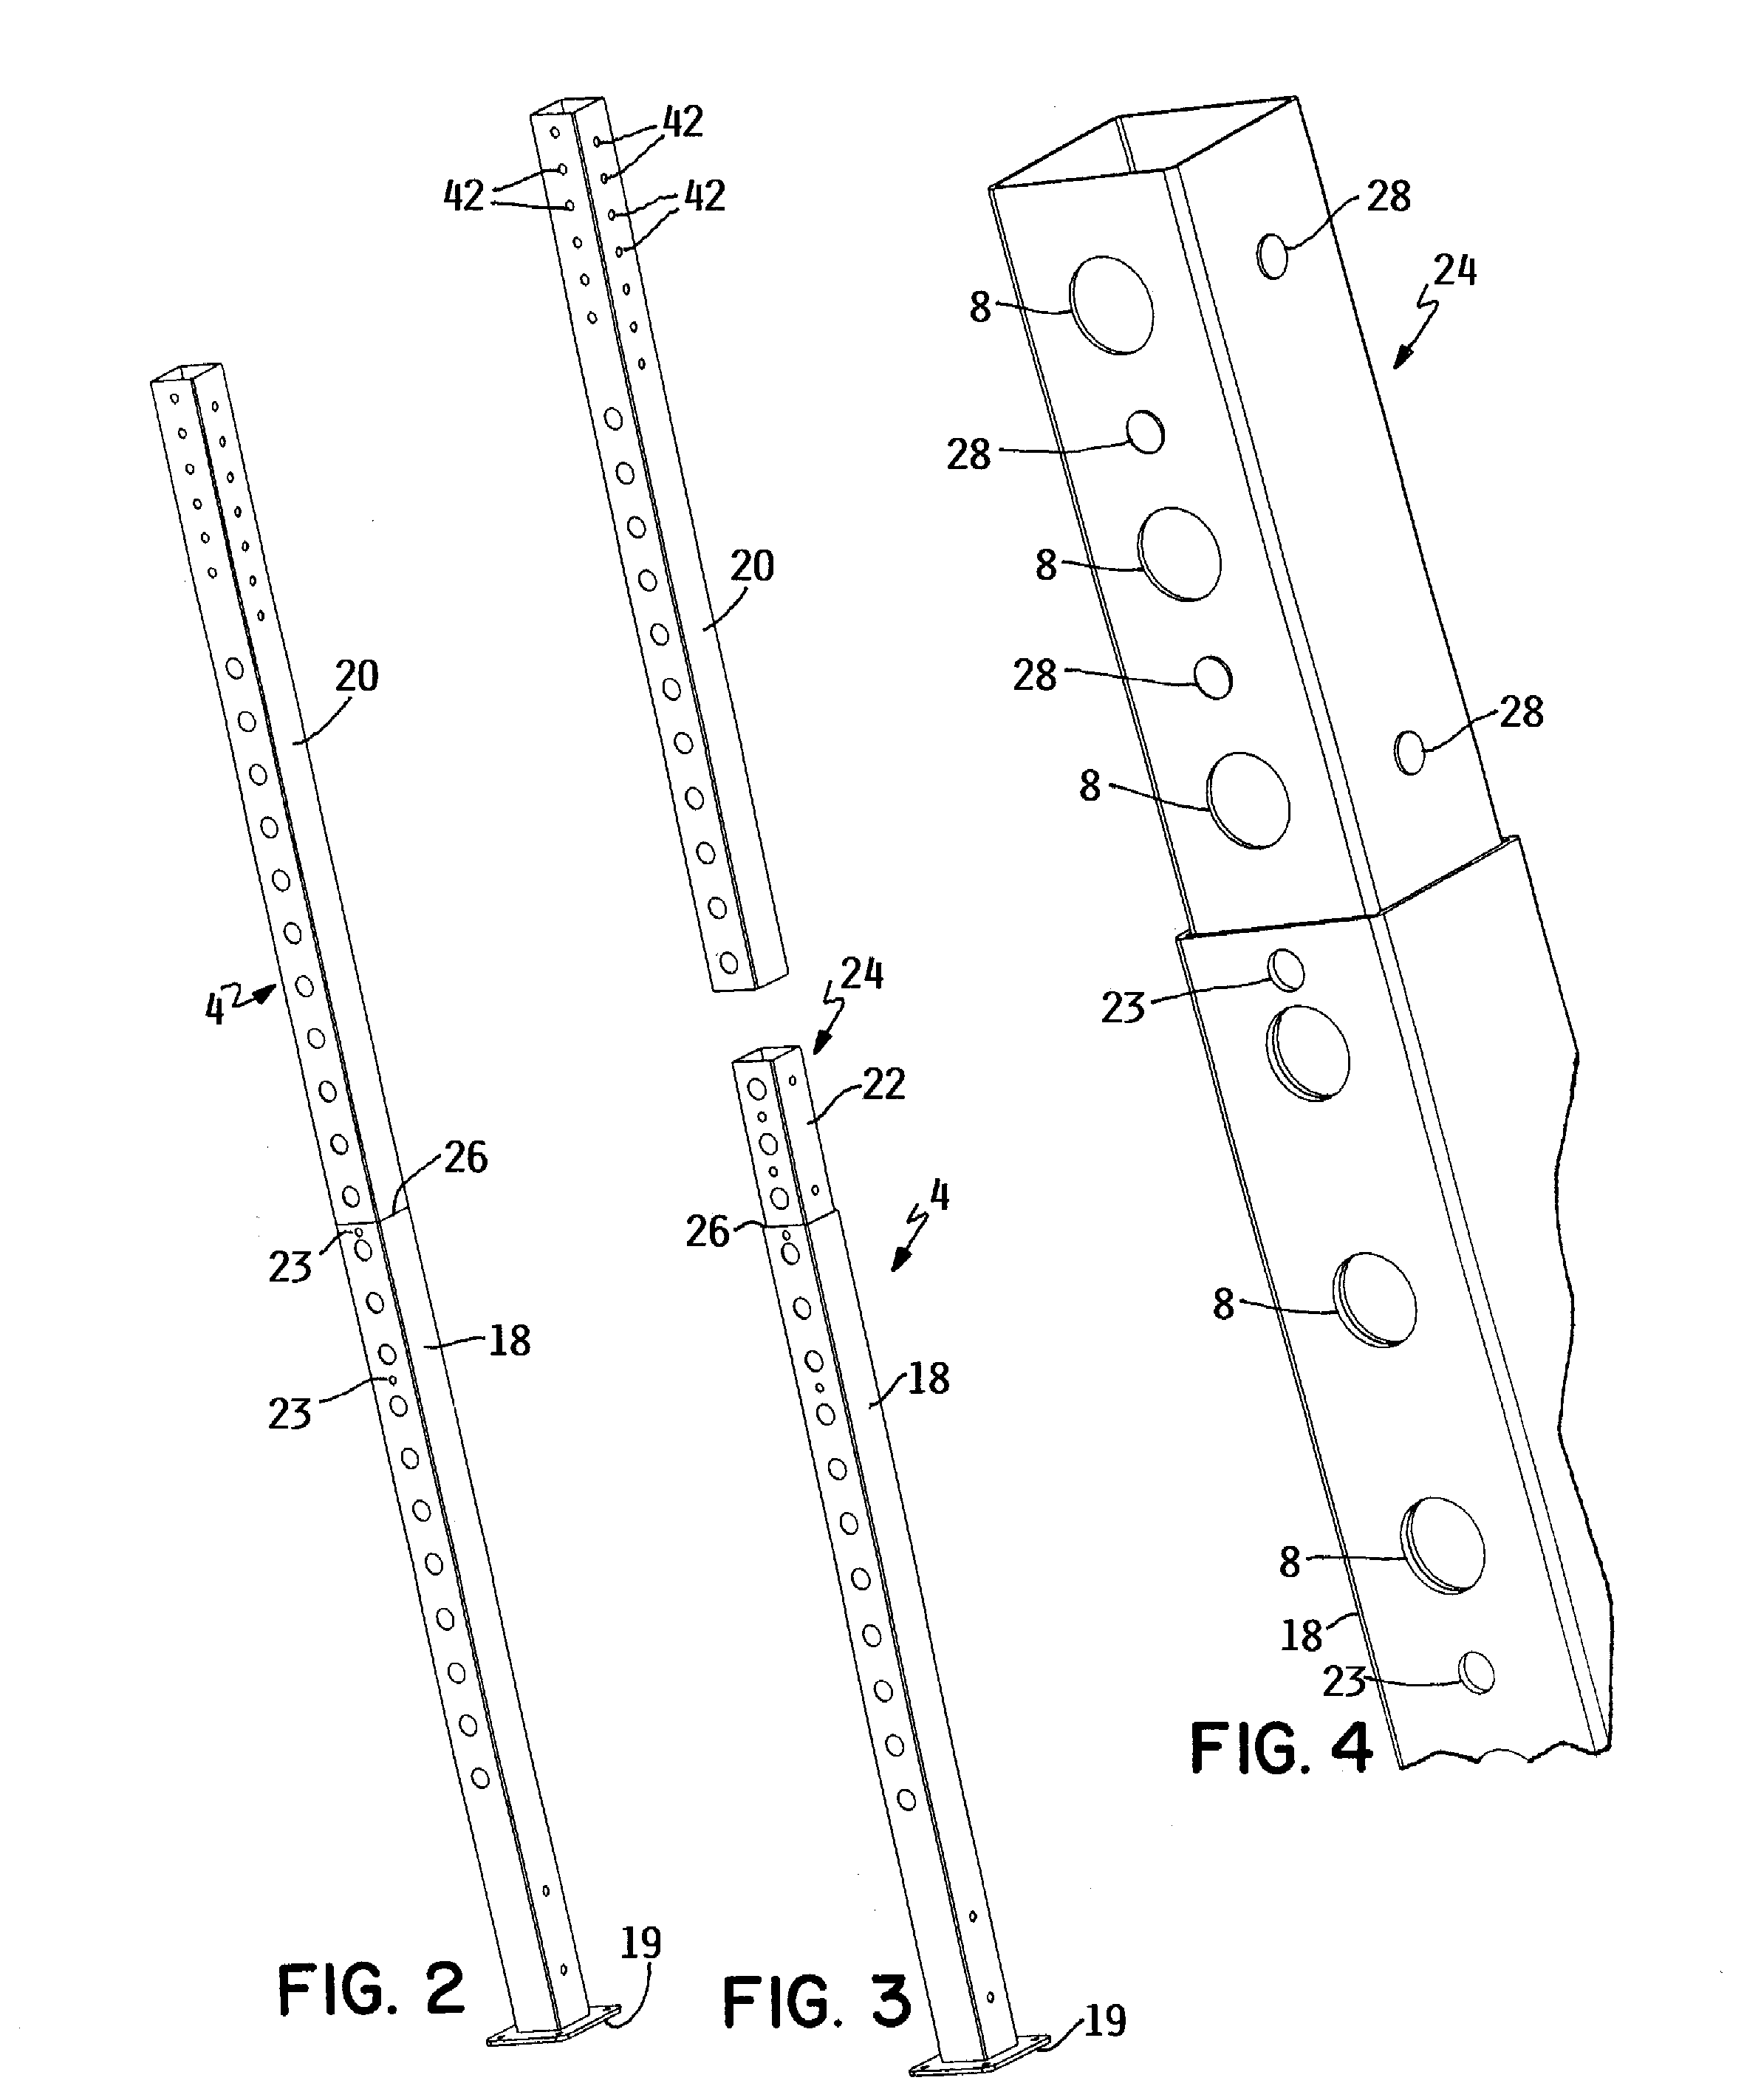 Exercise equipment frame having sectional structural members